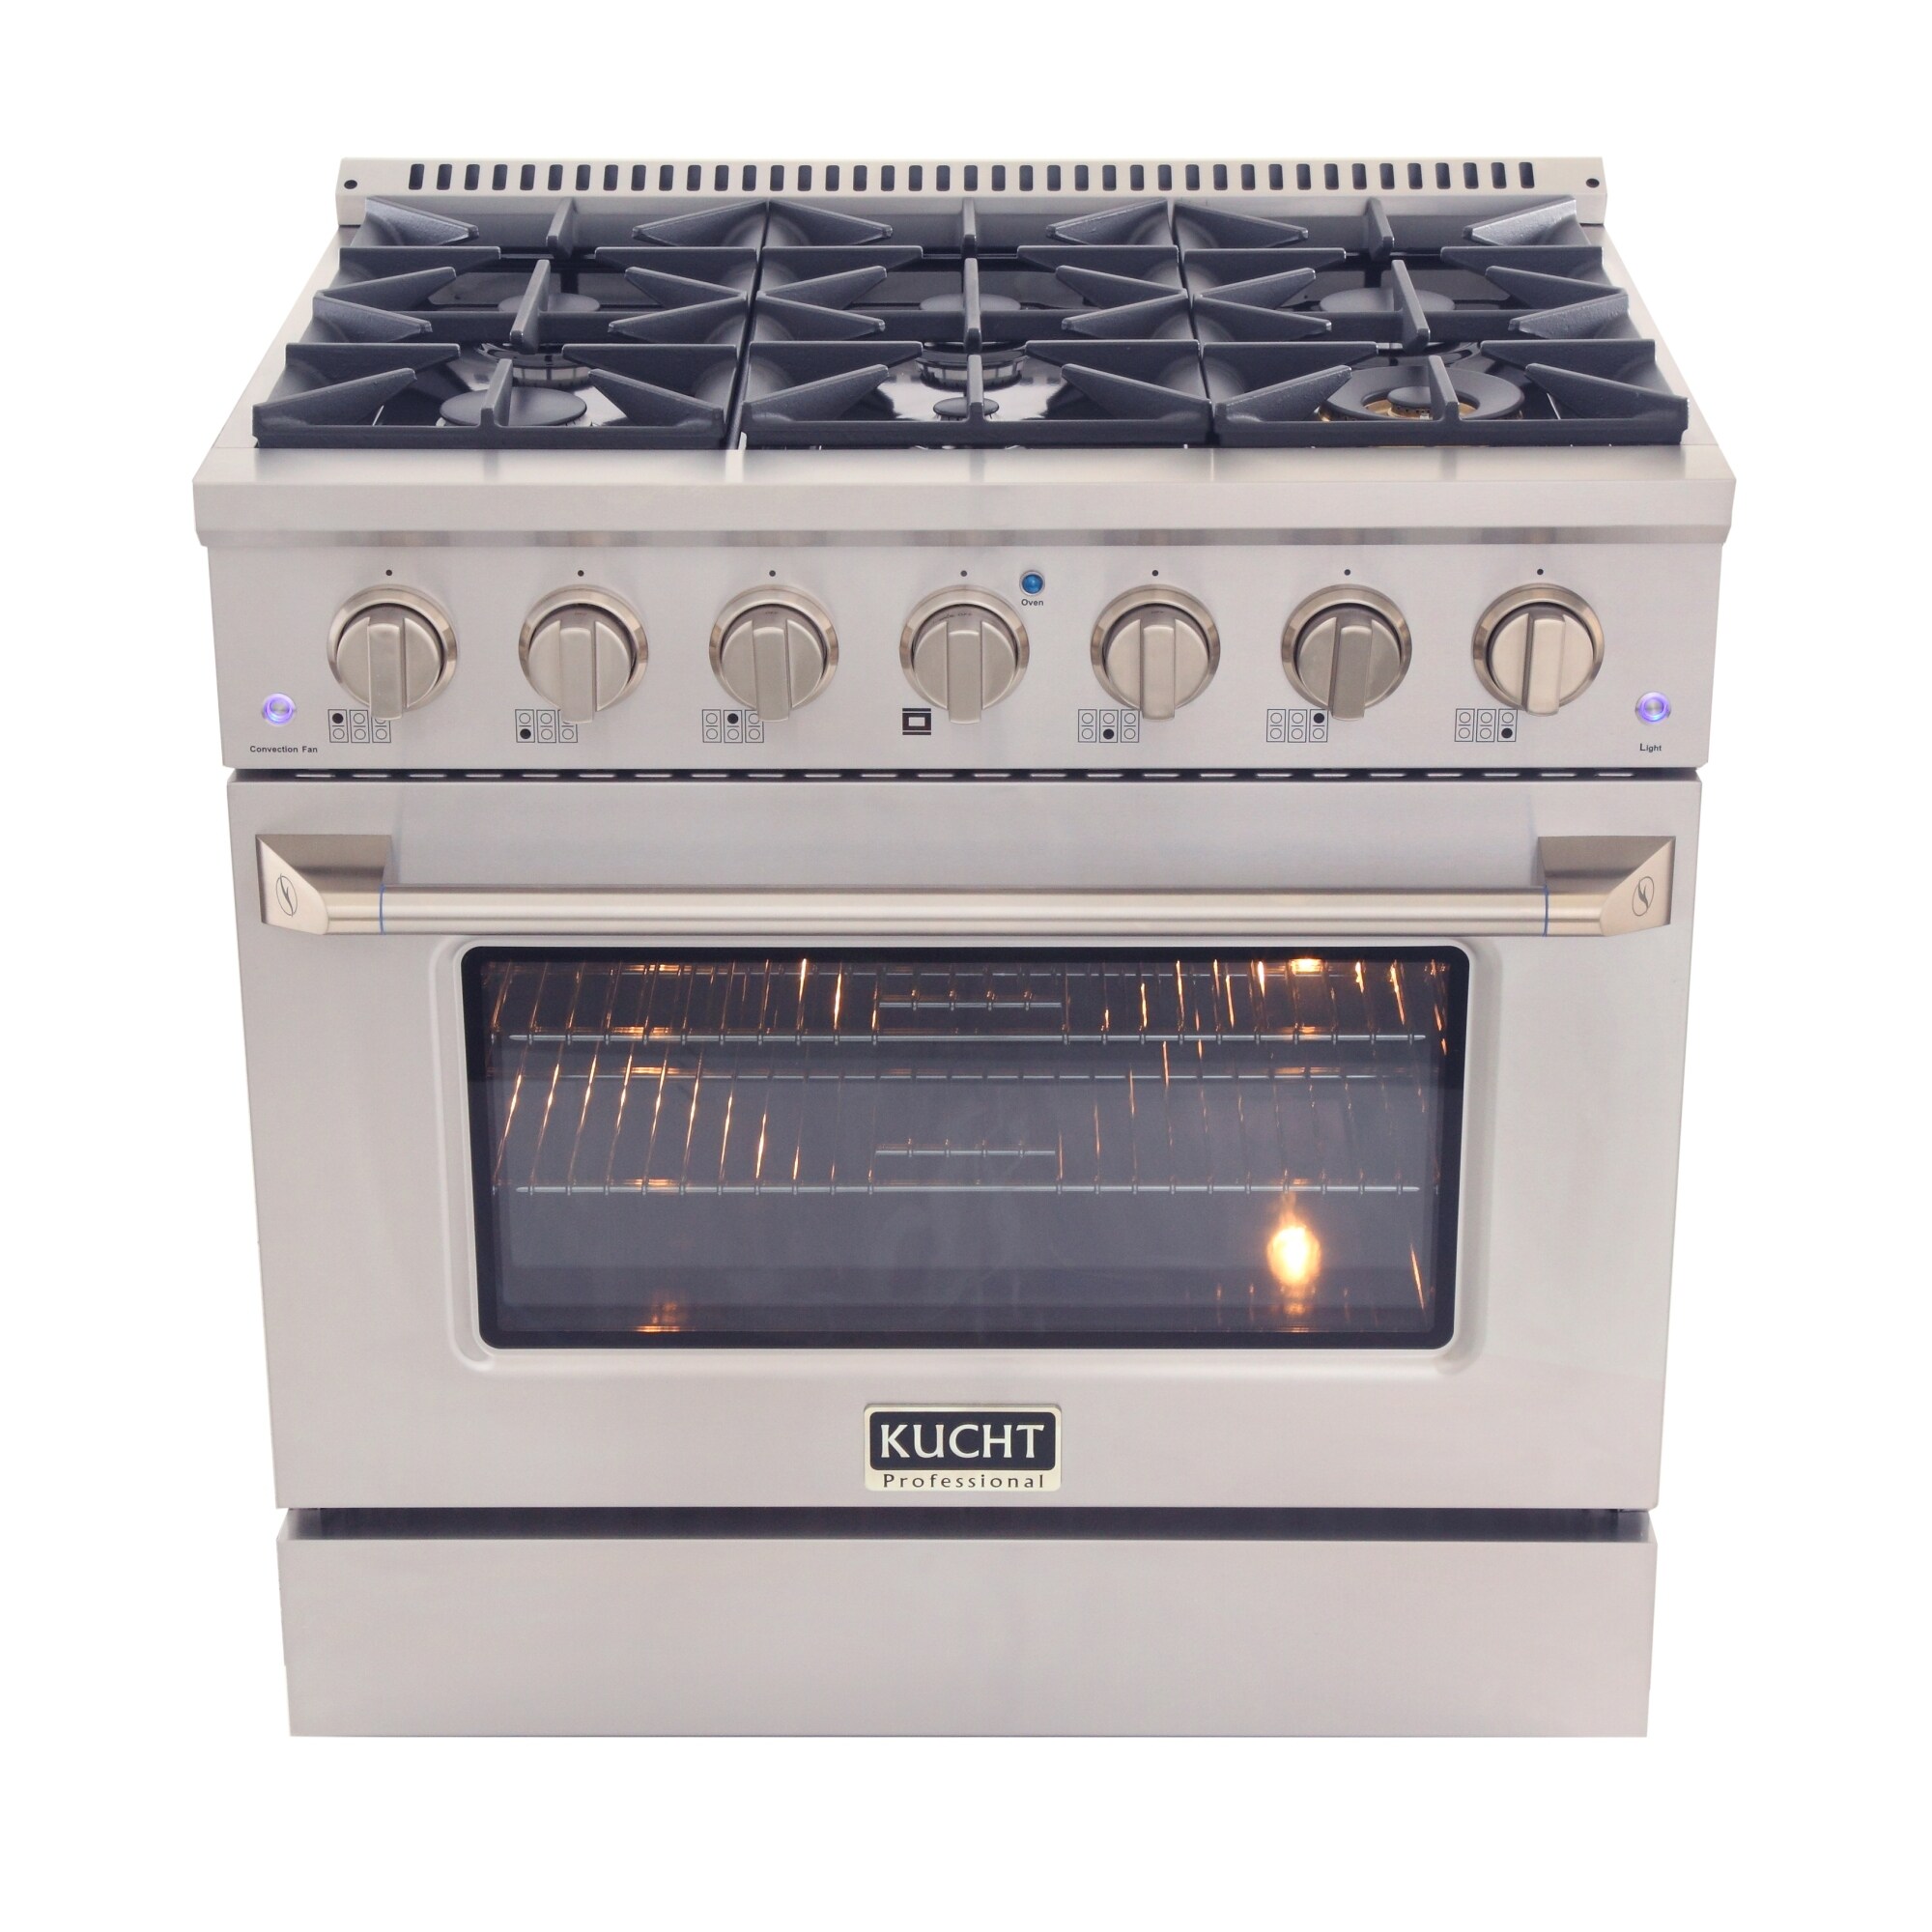 KUCHT 36 in. 5.2 cu. ft. Natural Gas Range with Sealed Burners and Convection Oven with optional color door.